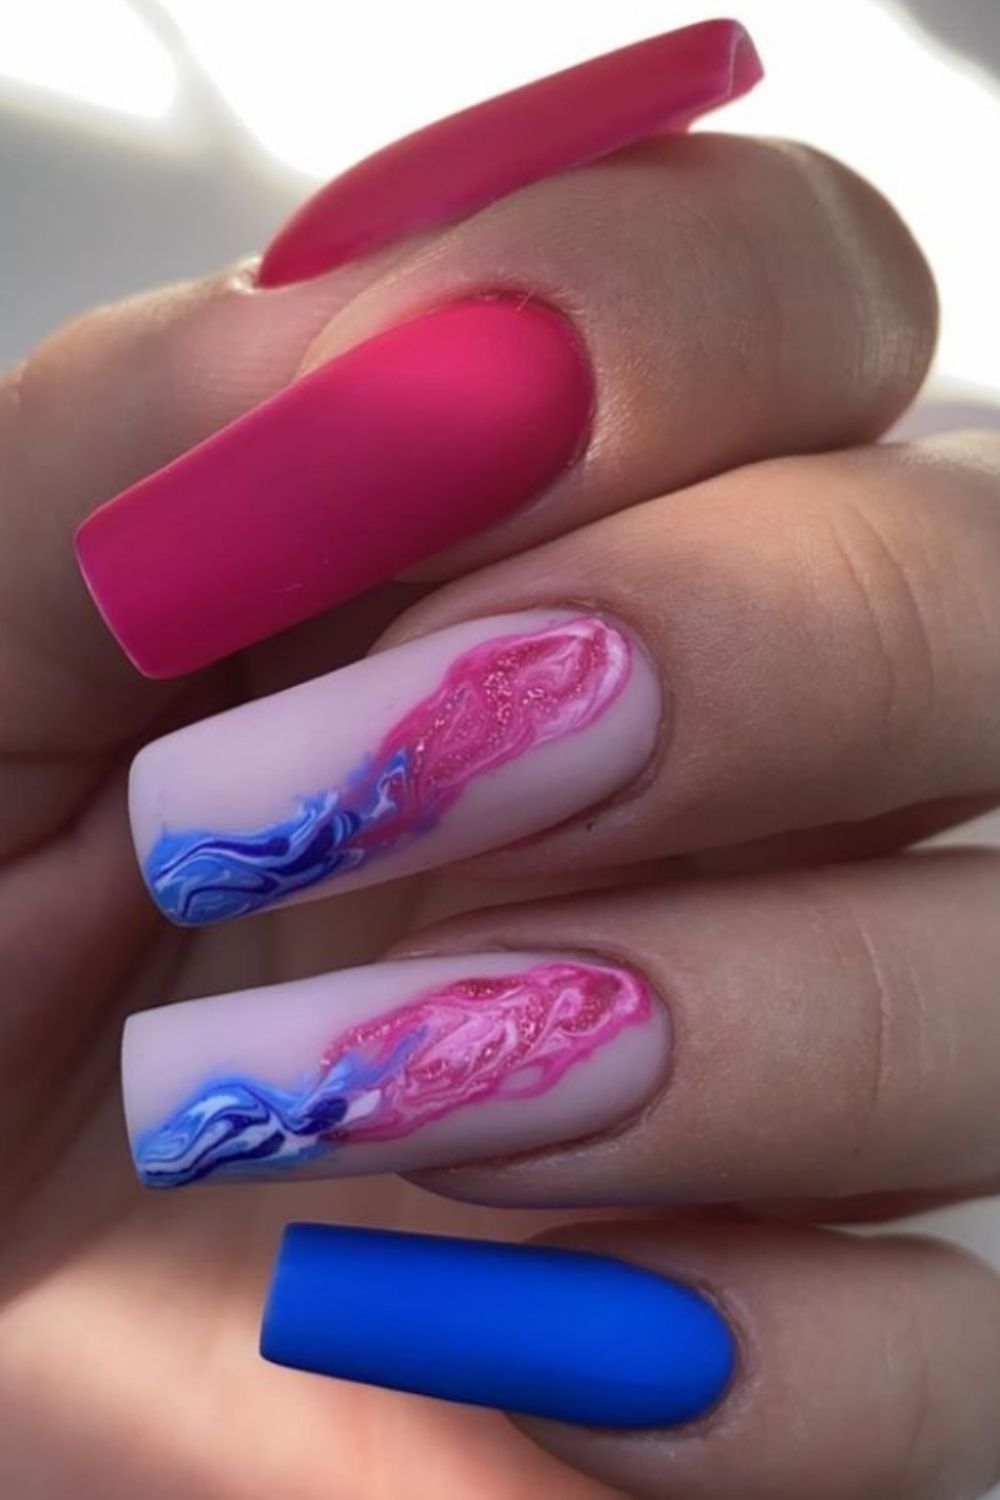 Red, blue and white coffin nail art design